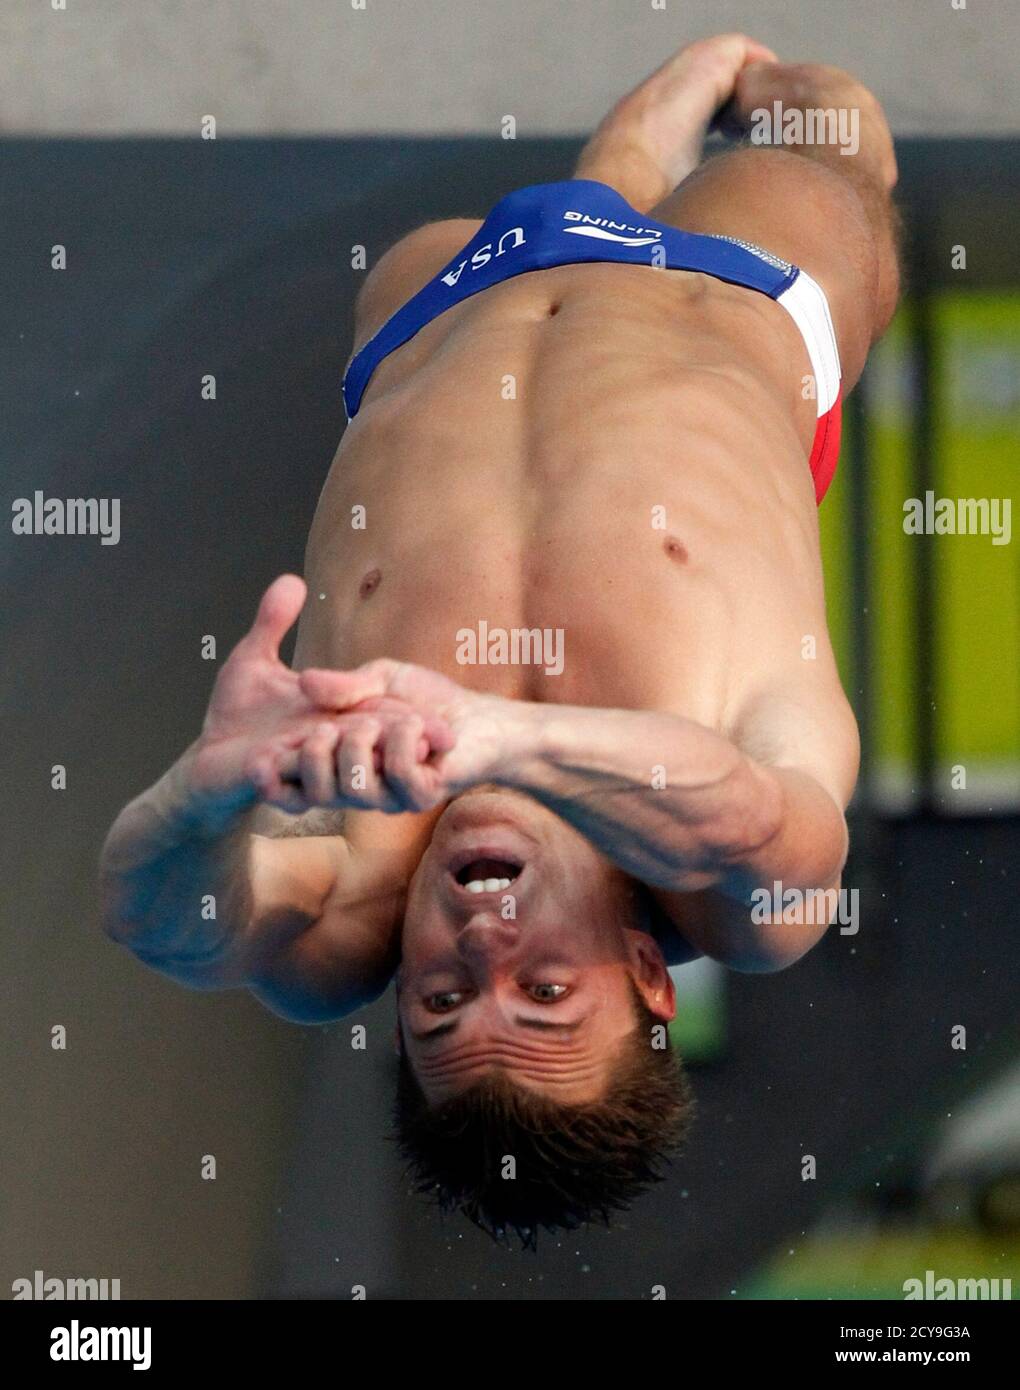 Troy Dumais of the U.S. competes in the men's 3m springboard final at the  14th FINA World Championships in Shanghai July 22, 2011. REUTERS/Bobby Yip  (CHINA - Tags: SPORT DIVING AQUATICS Fotografía